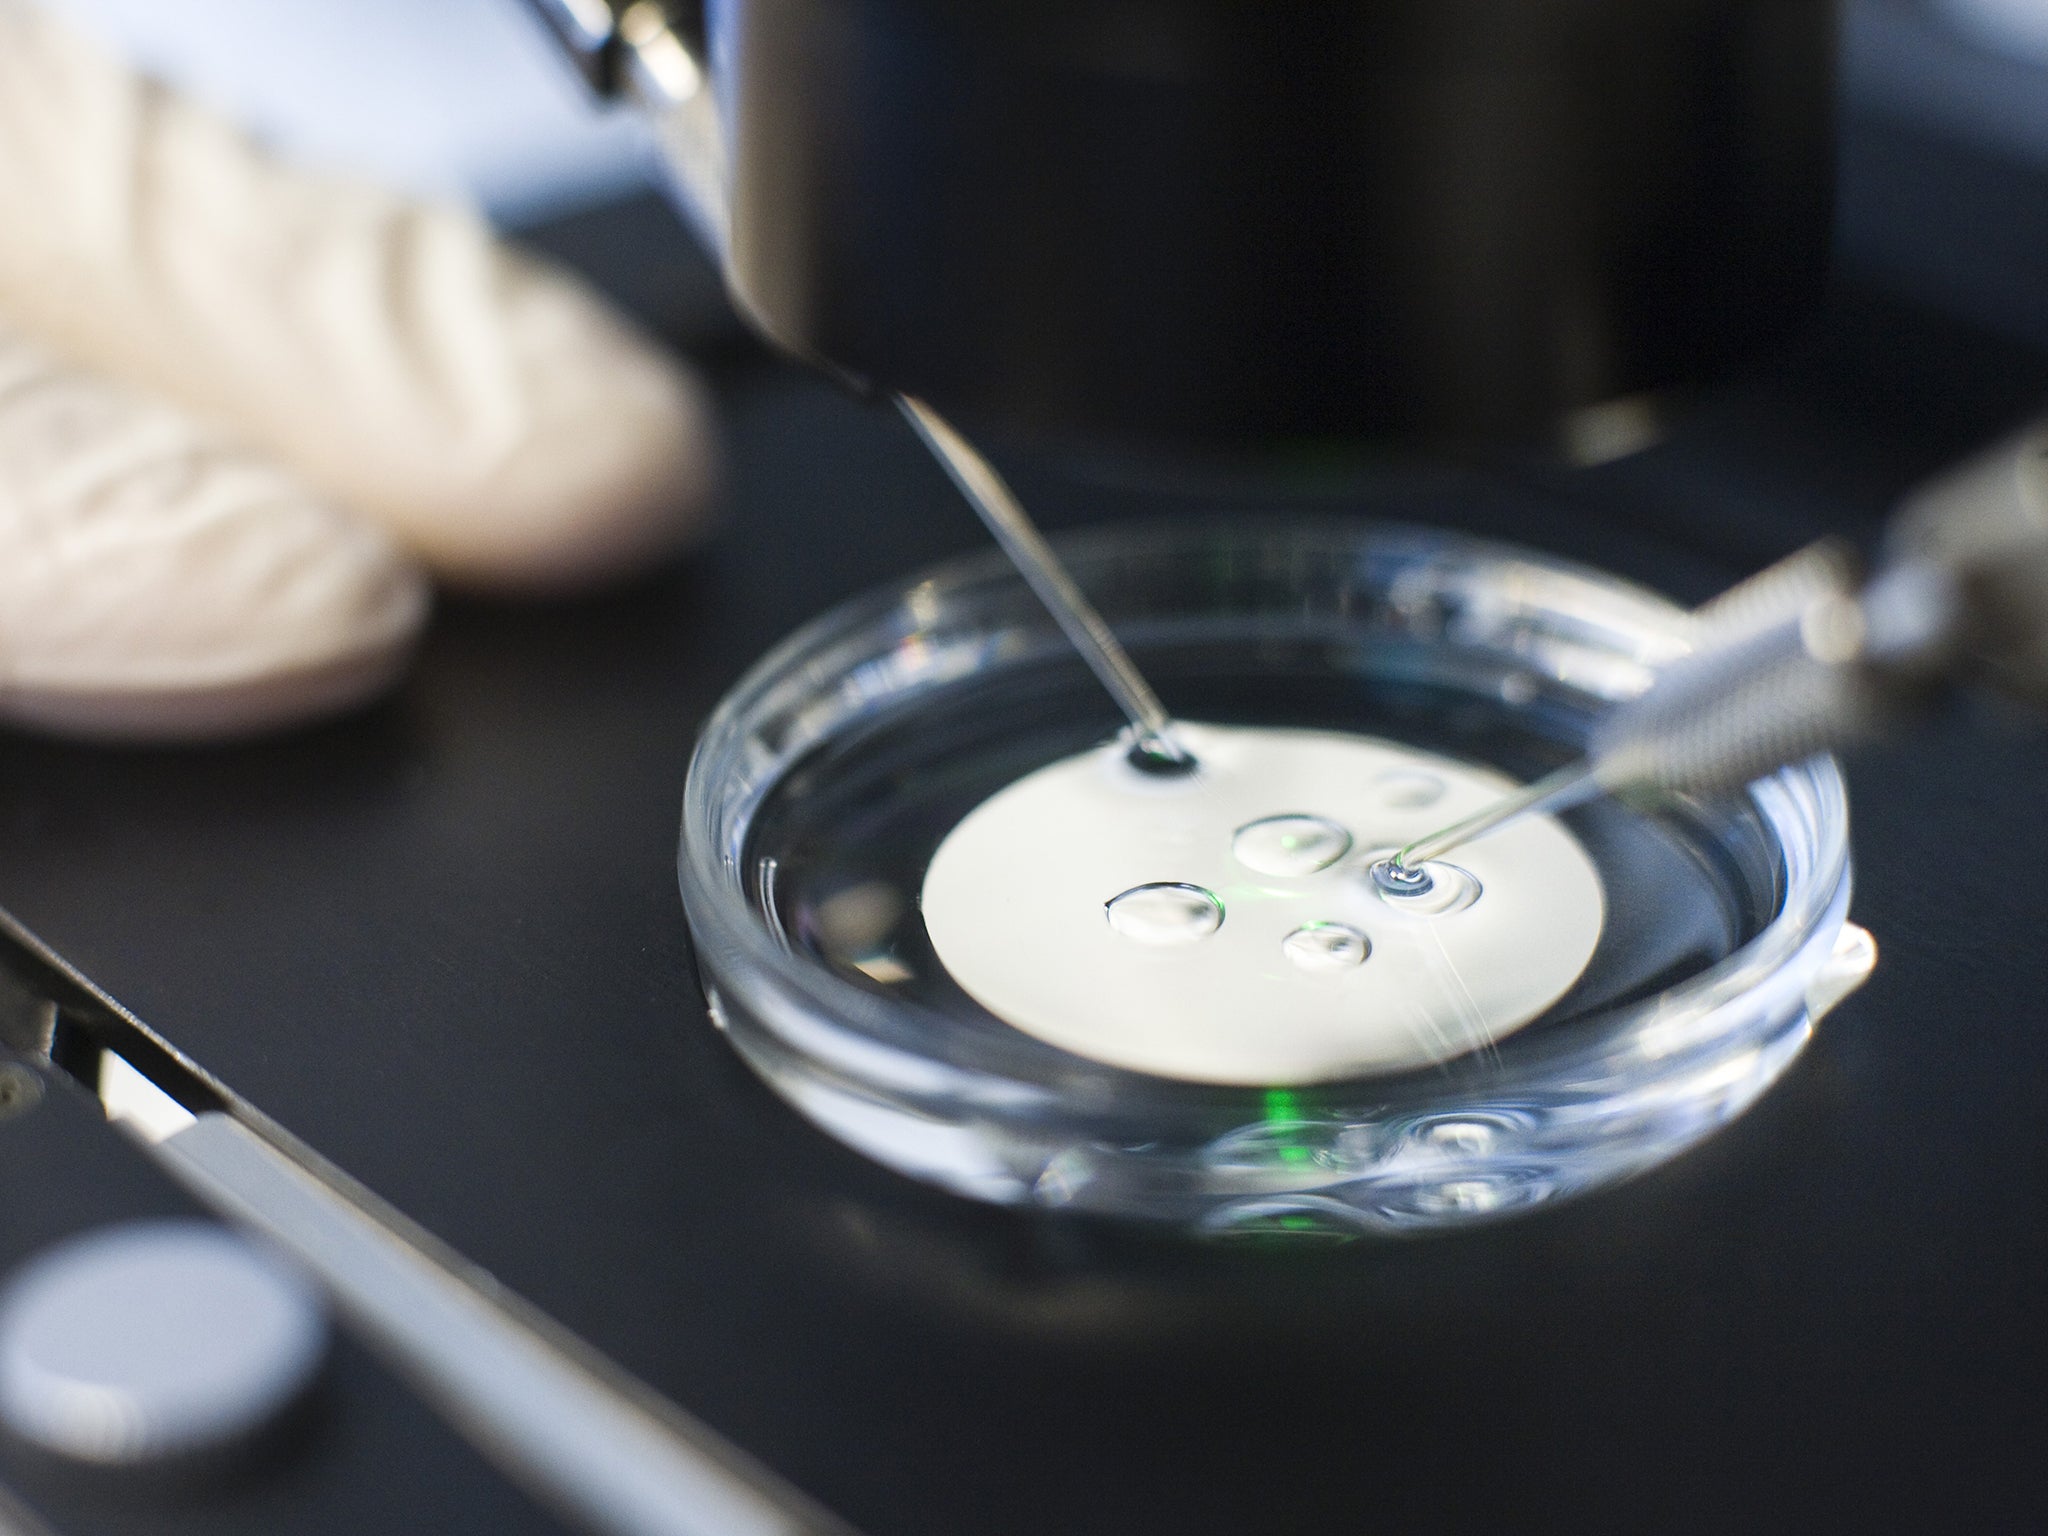 The genetic manipulation of human IVF embryos is set to start in Britain for the first time